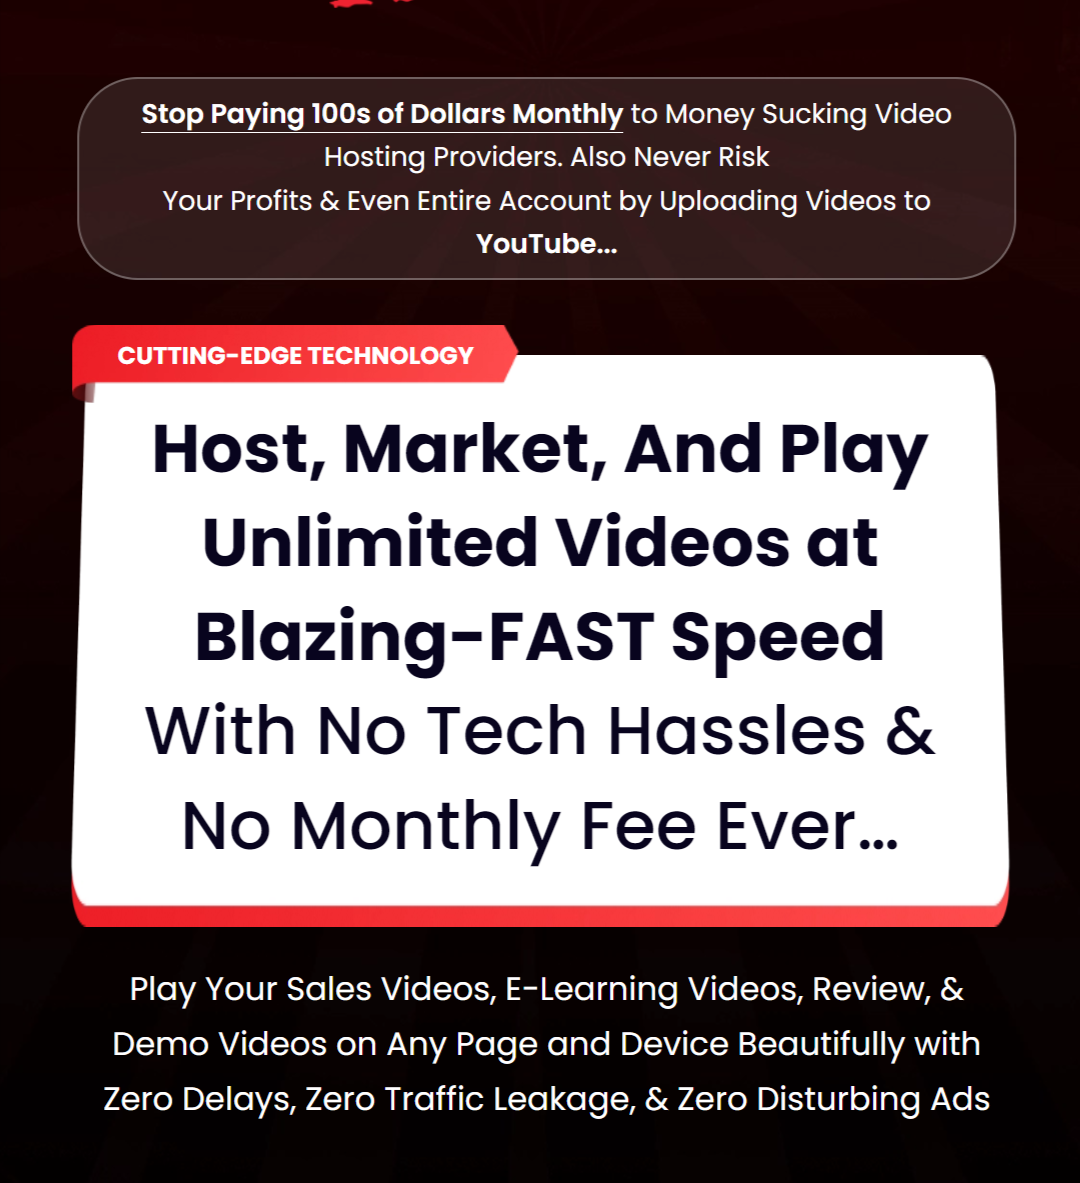 VidHostPro Blazing Fast Hosting Player Marketing Technology VidHostPro Review: The Unlimited Video Hosting And Marketing Solution. Host, Market, And Play Unlimited Videos at Blazing-FAST Speed With No Tech Hassles And No Monthly Fee Ever